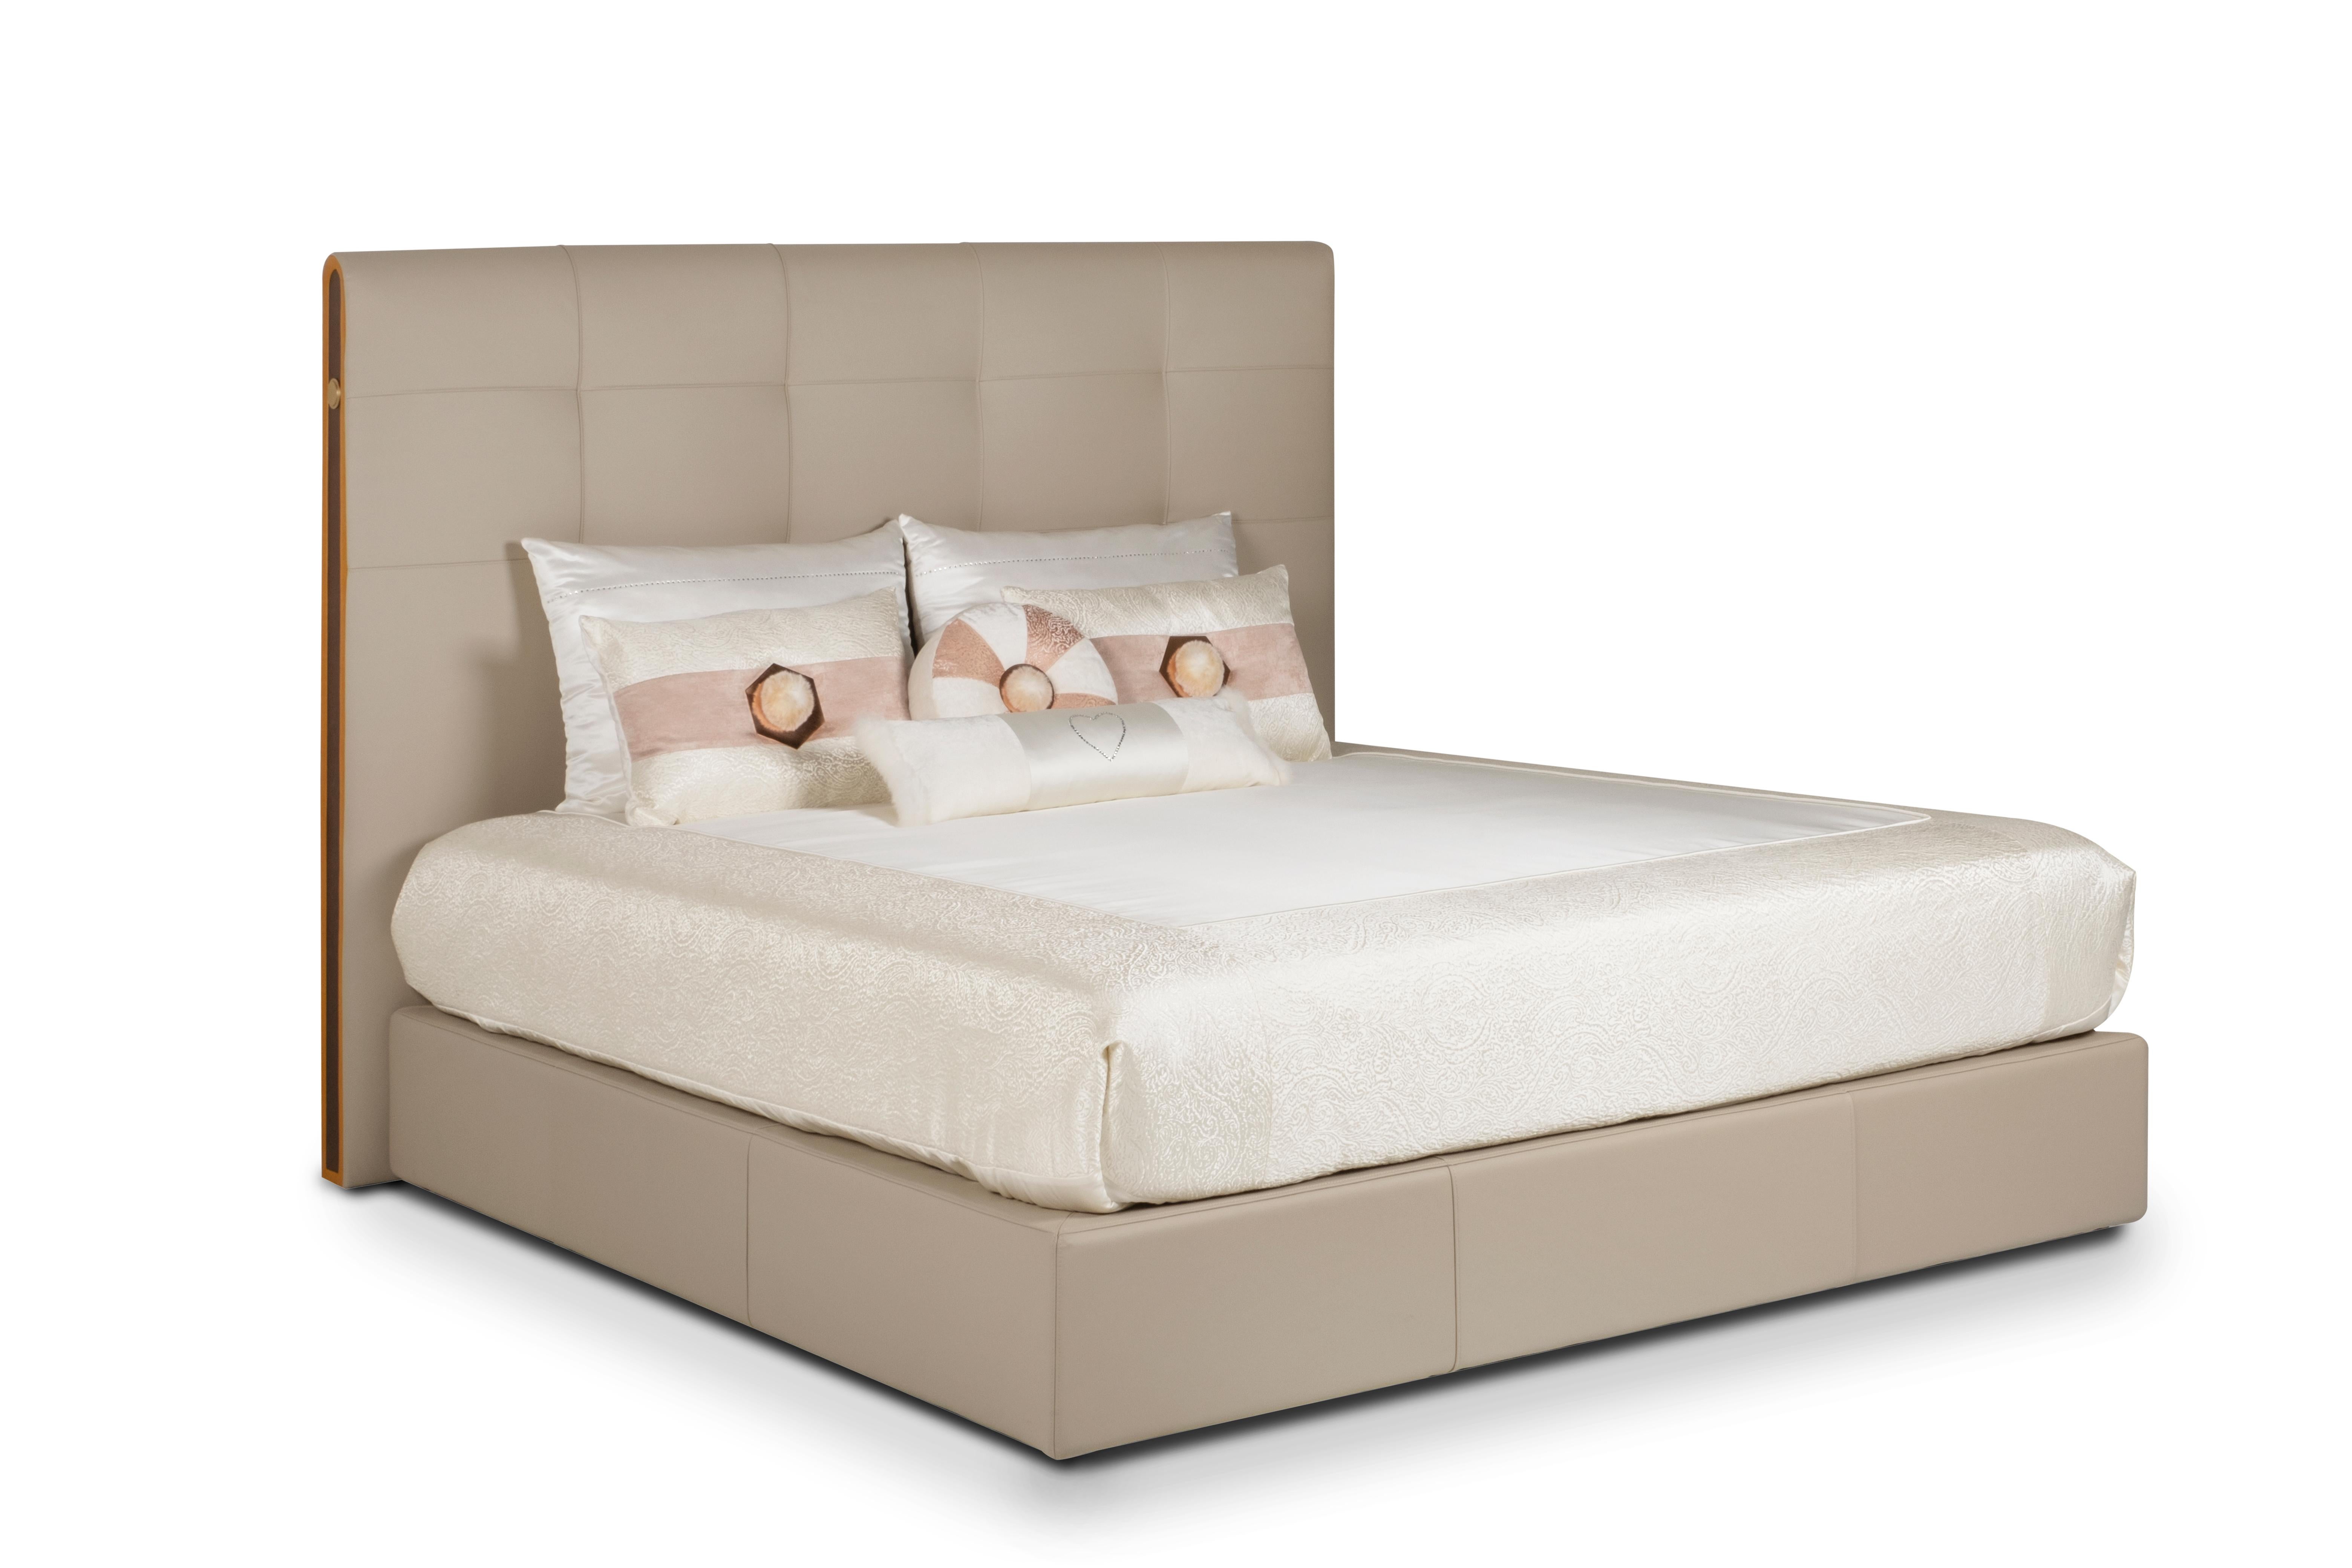 Brushed Modern Midnight Bed, Beige Italian Leather, Handmade in Portugal by Greenapple For Sale